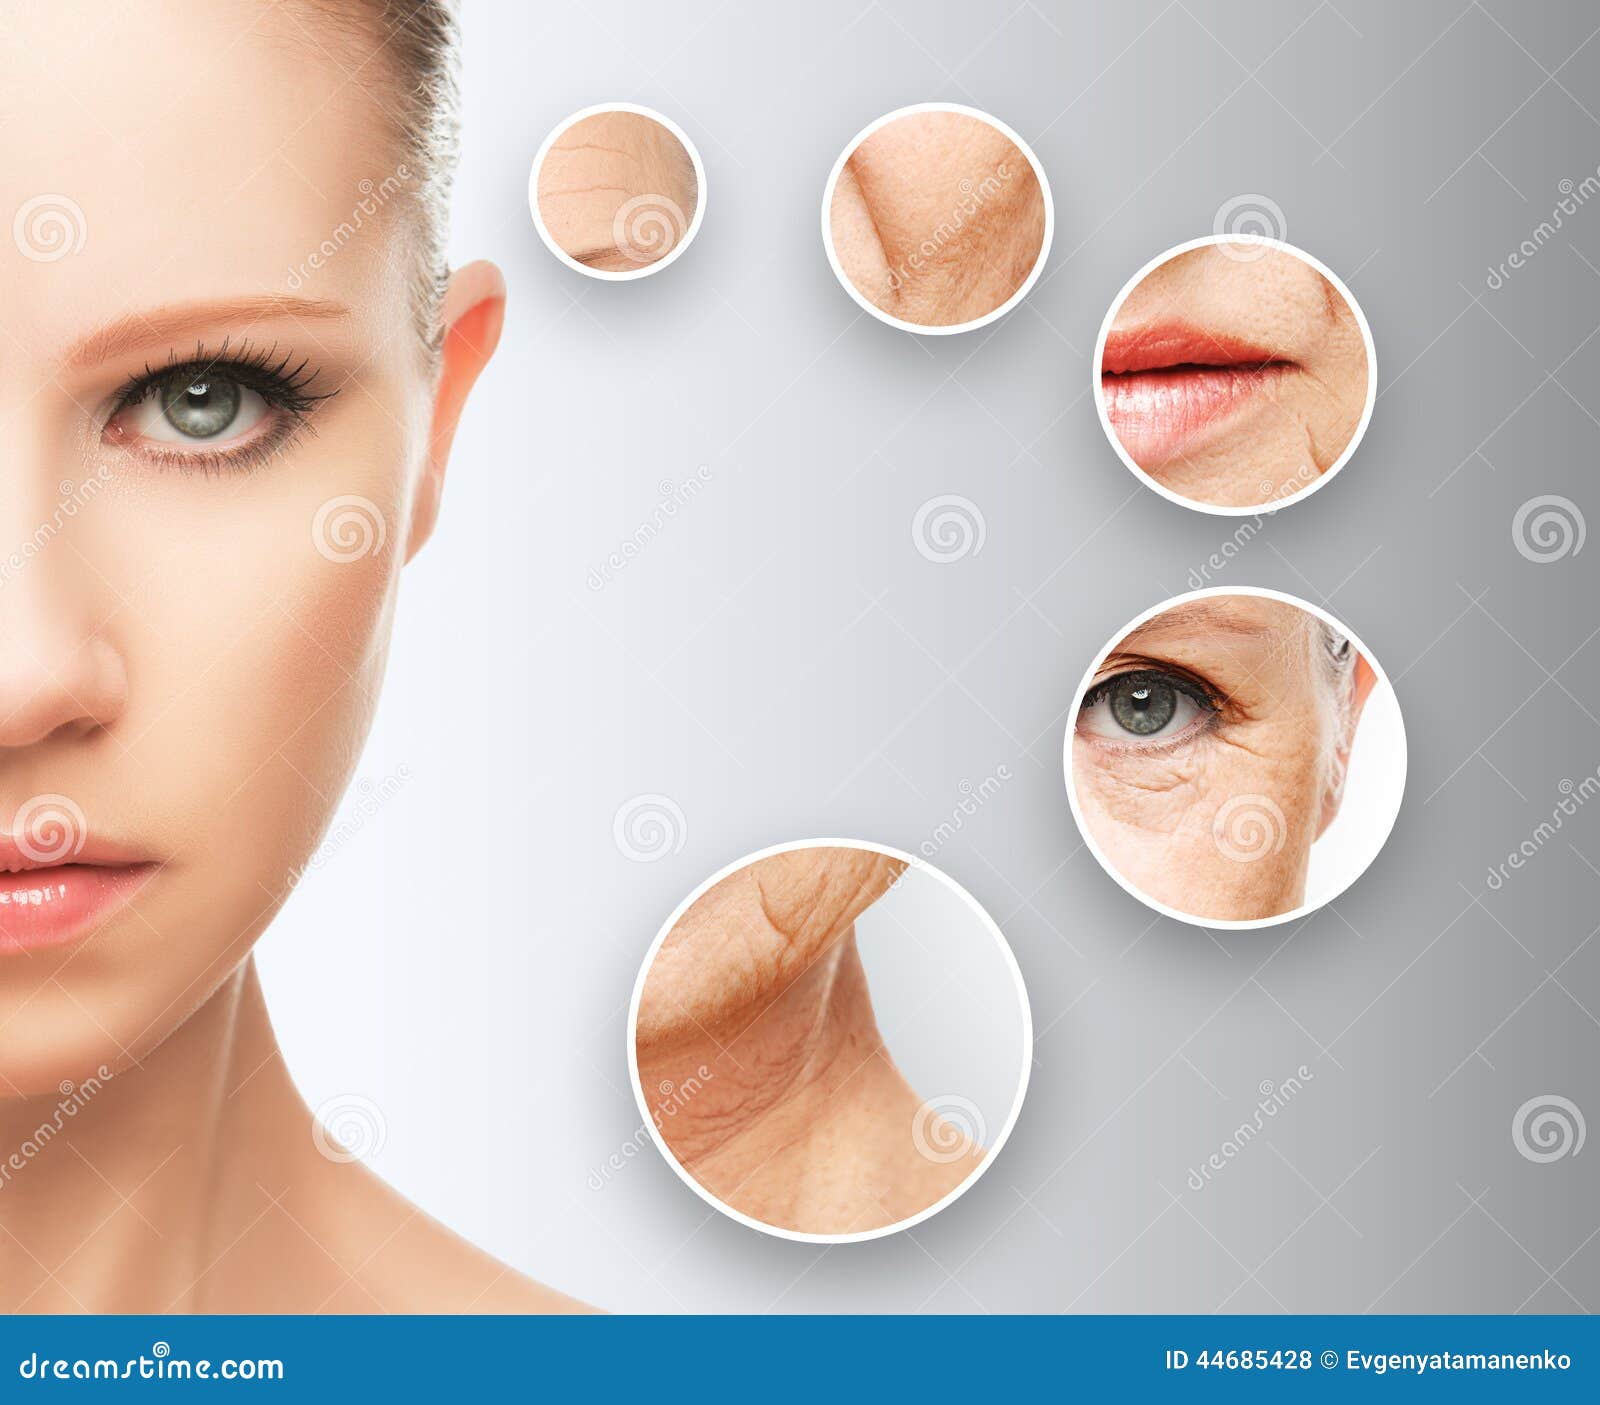 beauty concept skin aging. anti-aging procedures, rejuvenation, lifting, tightening of facial skin